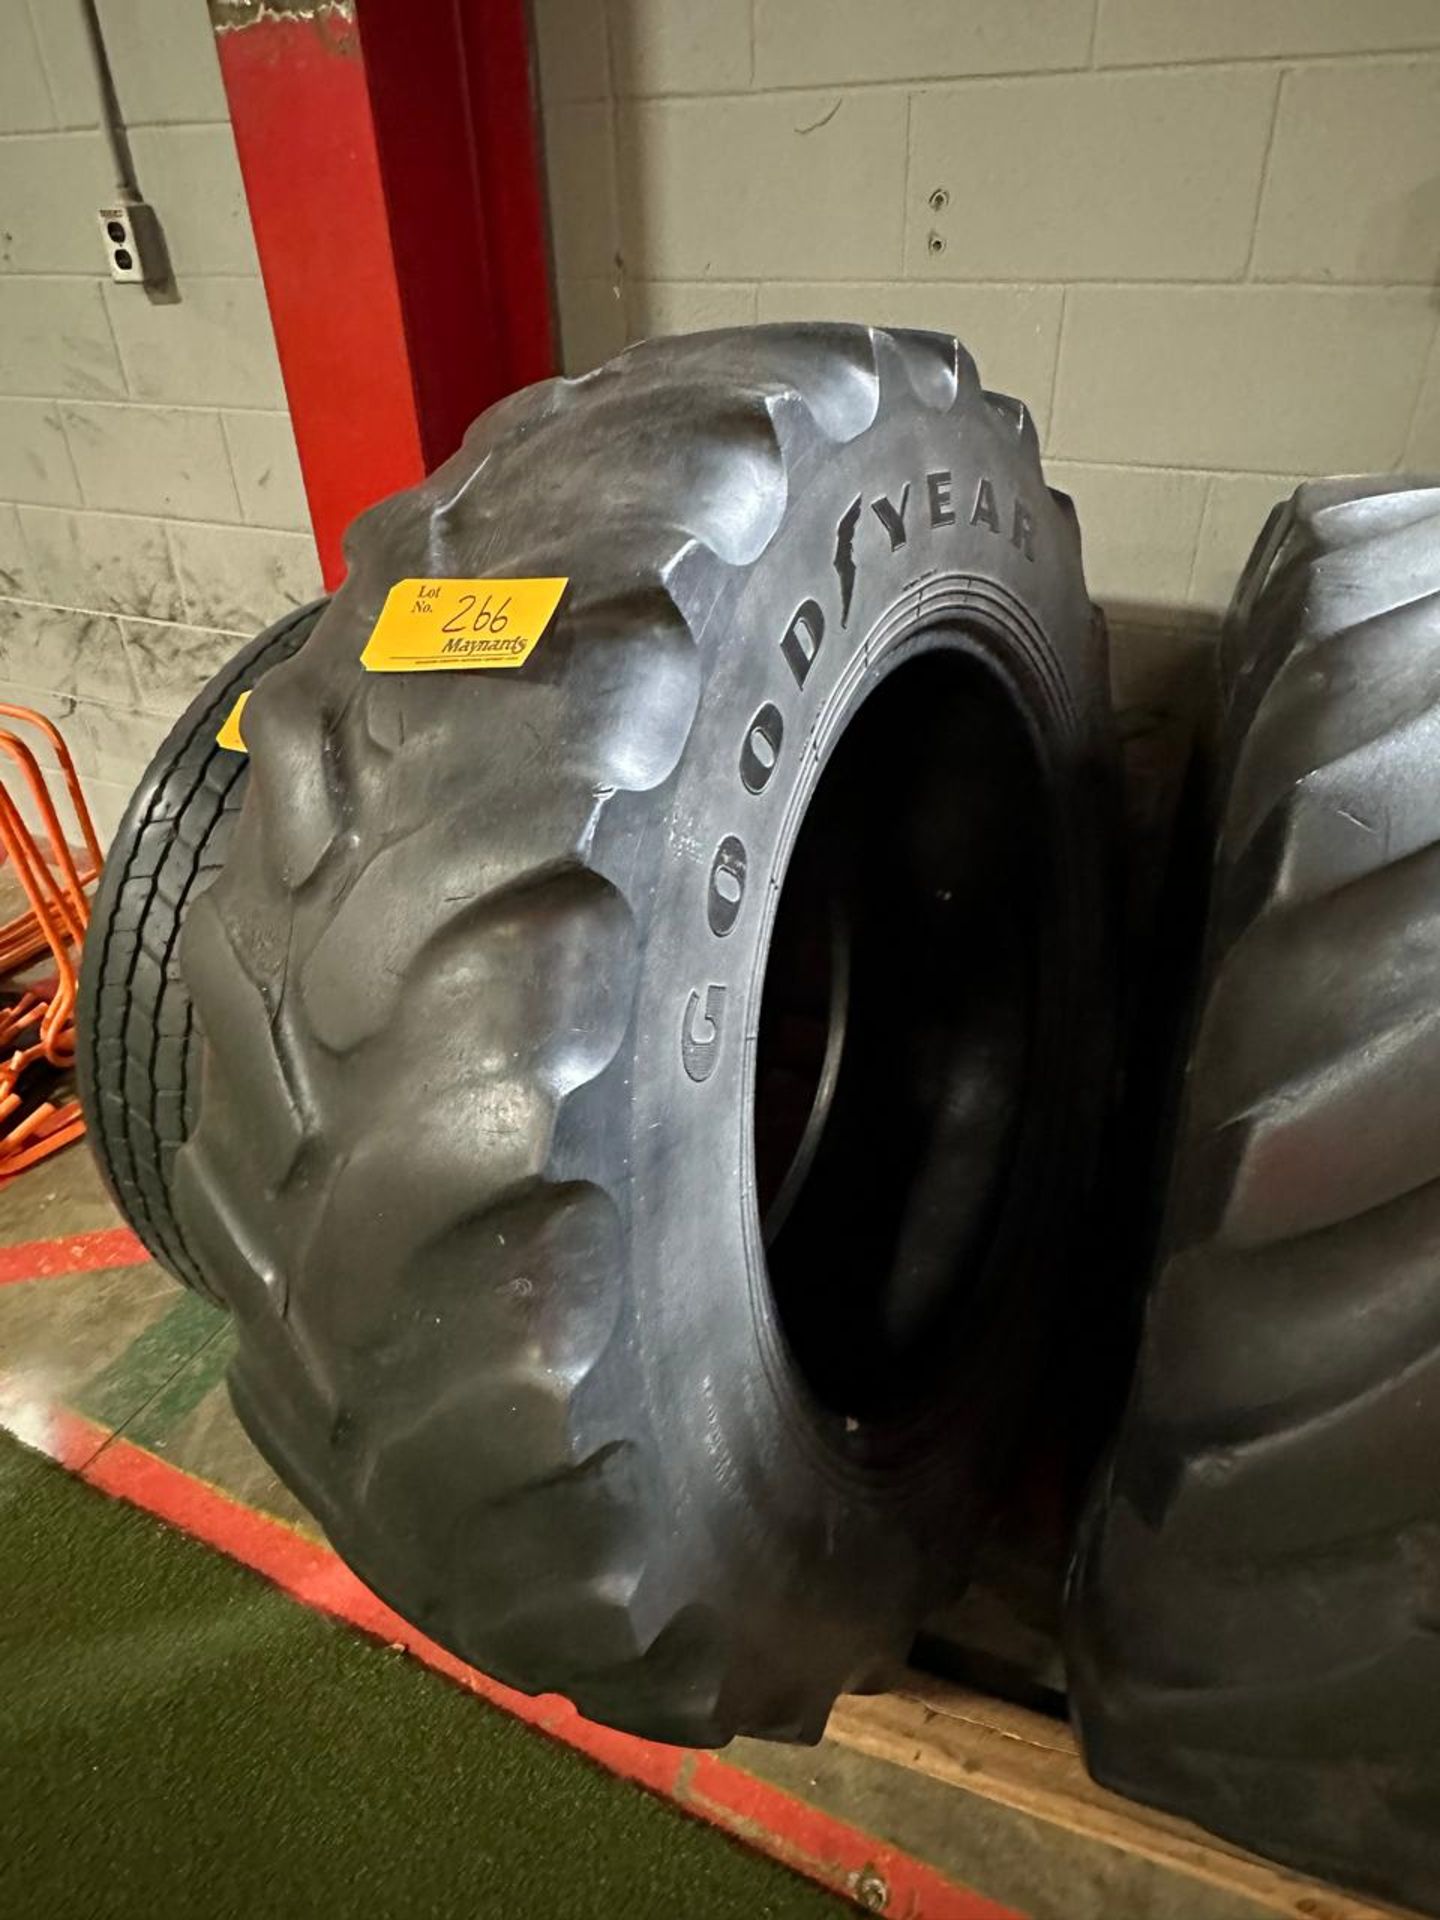 Workout Tire - Image 2 of 2